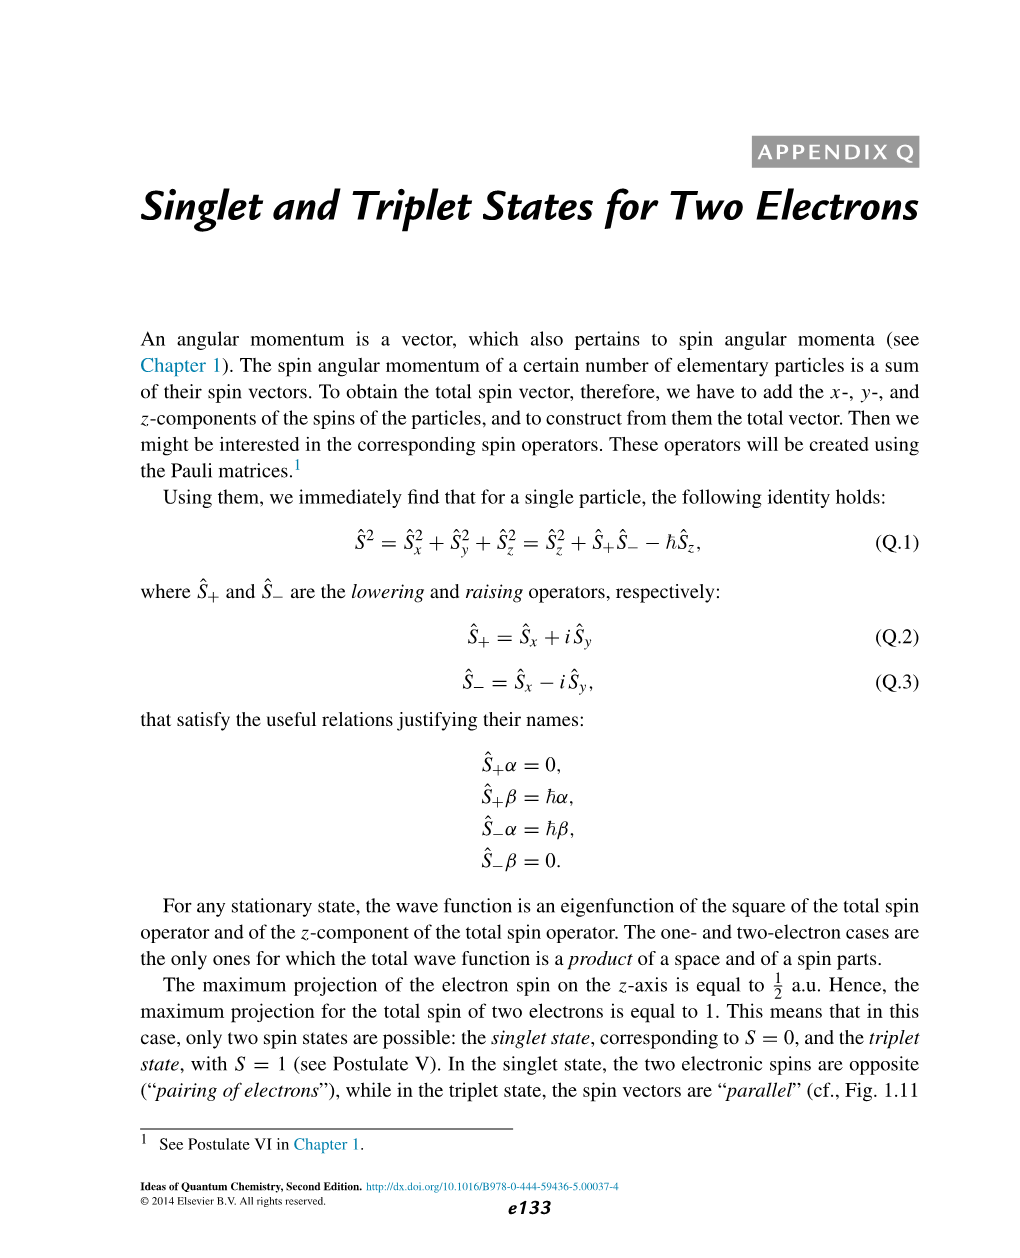 Singlet and Triplet States for Two Electrons